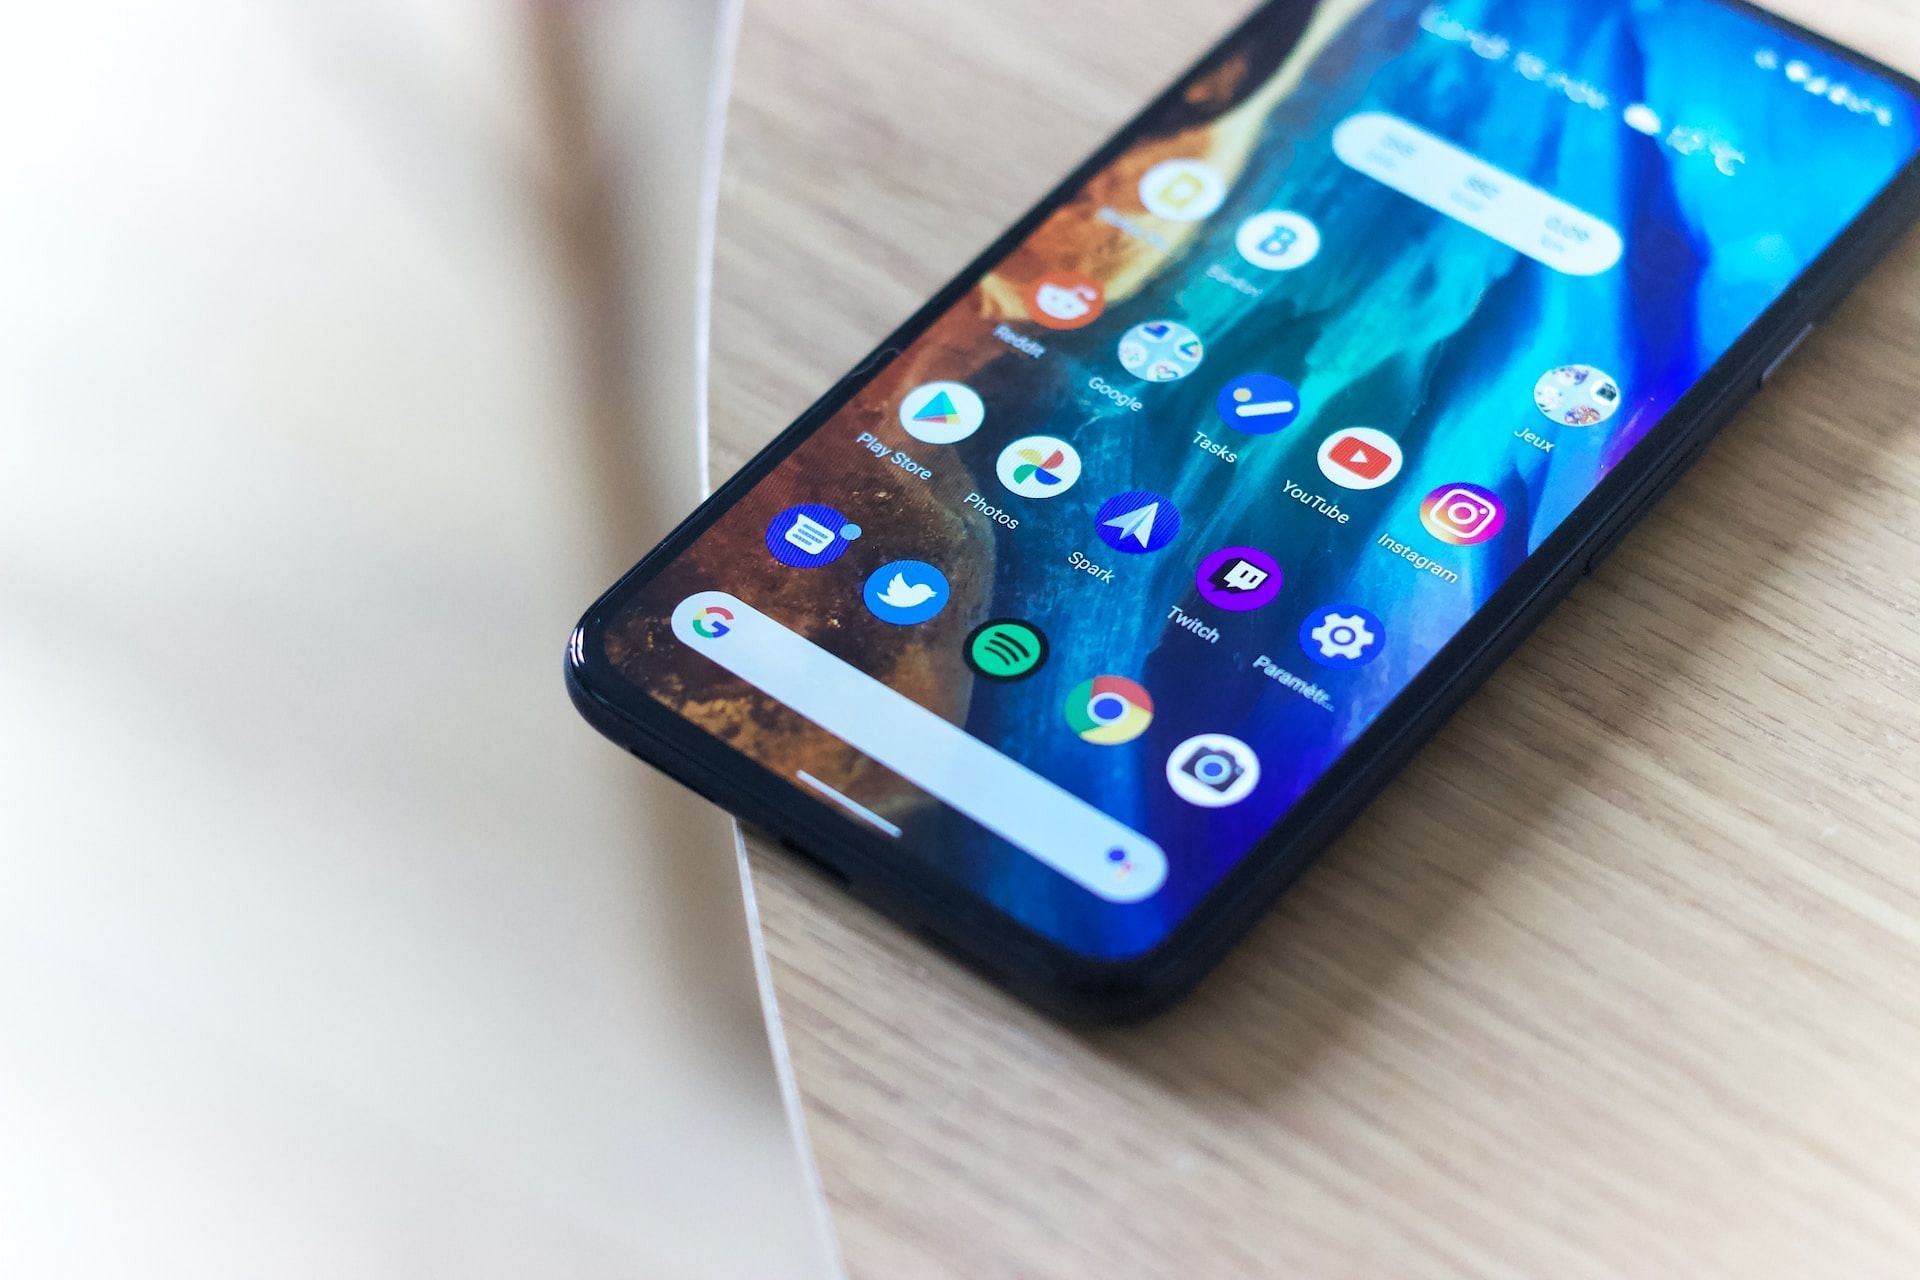 How users can hide applications and other data on their Android phone (Image via Unsplash)